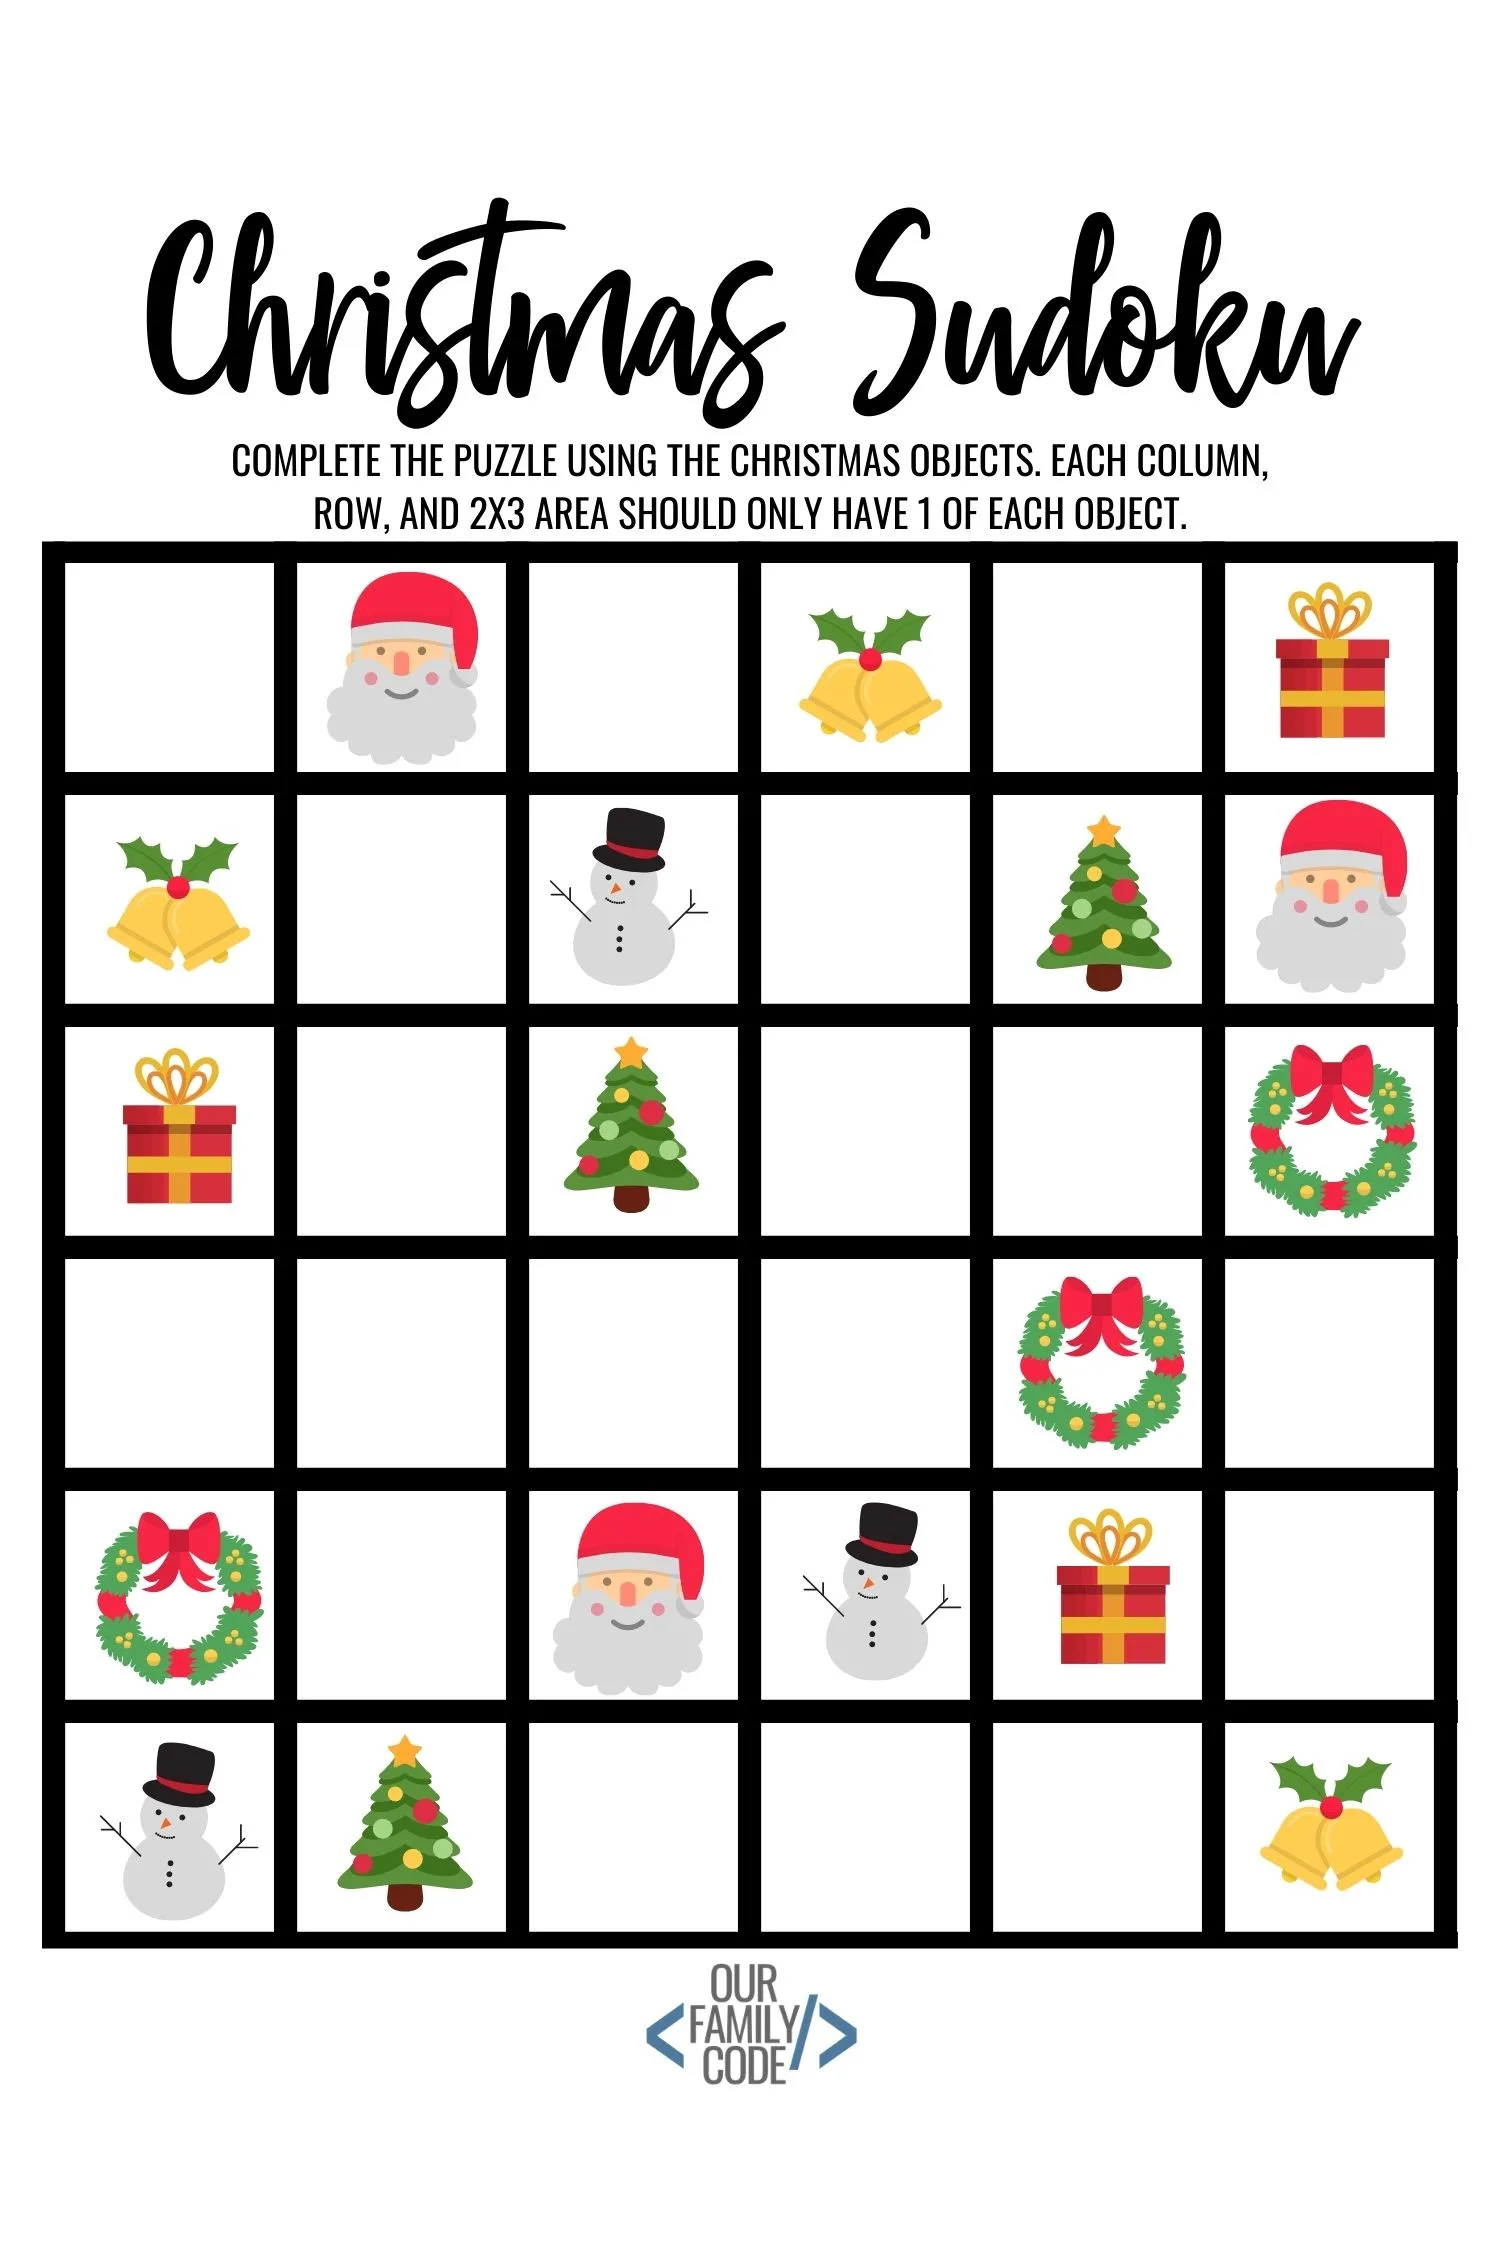 Work on logical reasoning and colors with this Christmas Sudoku unplugged coding activity for preschoolers to 5th graders! #STEAM #STEM #teachkidstocode #computationalthinking #algorithms #logicalreasoning #homeschool #sudokuforkids